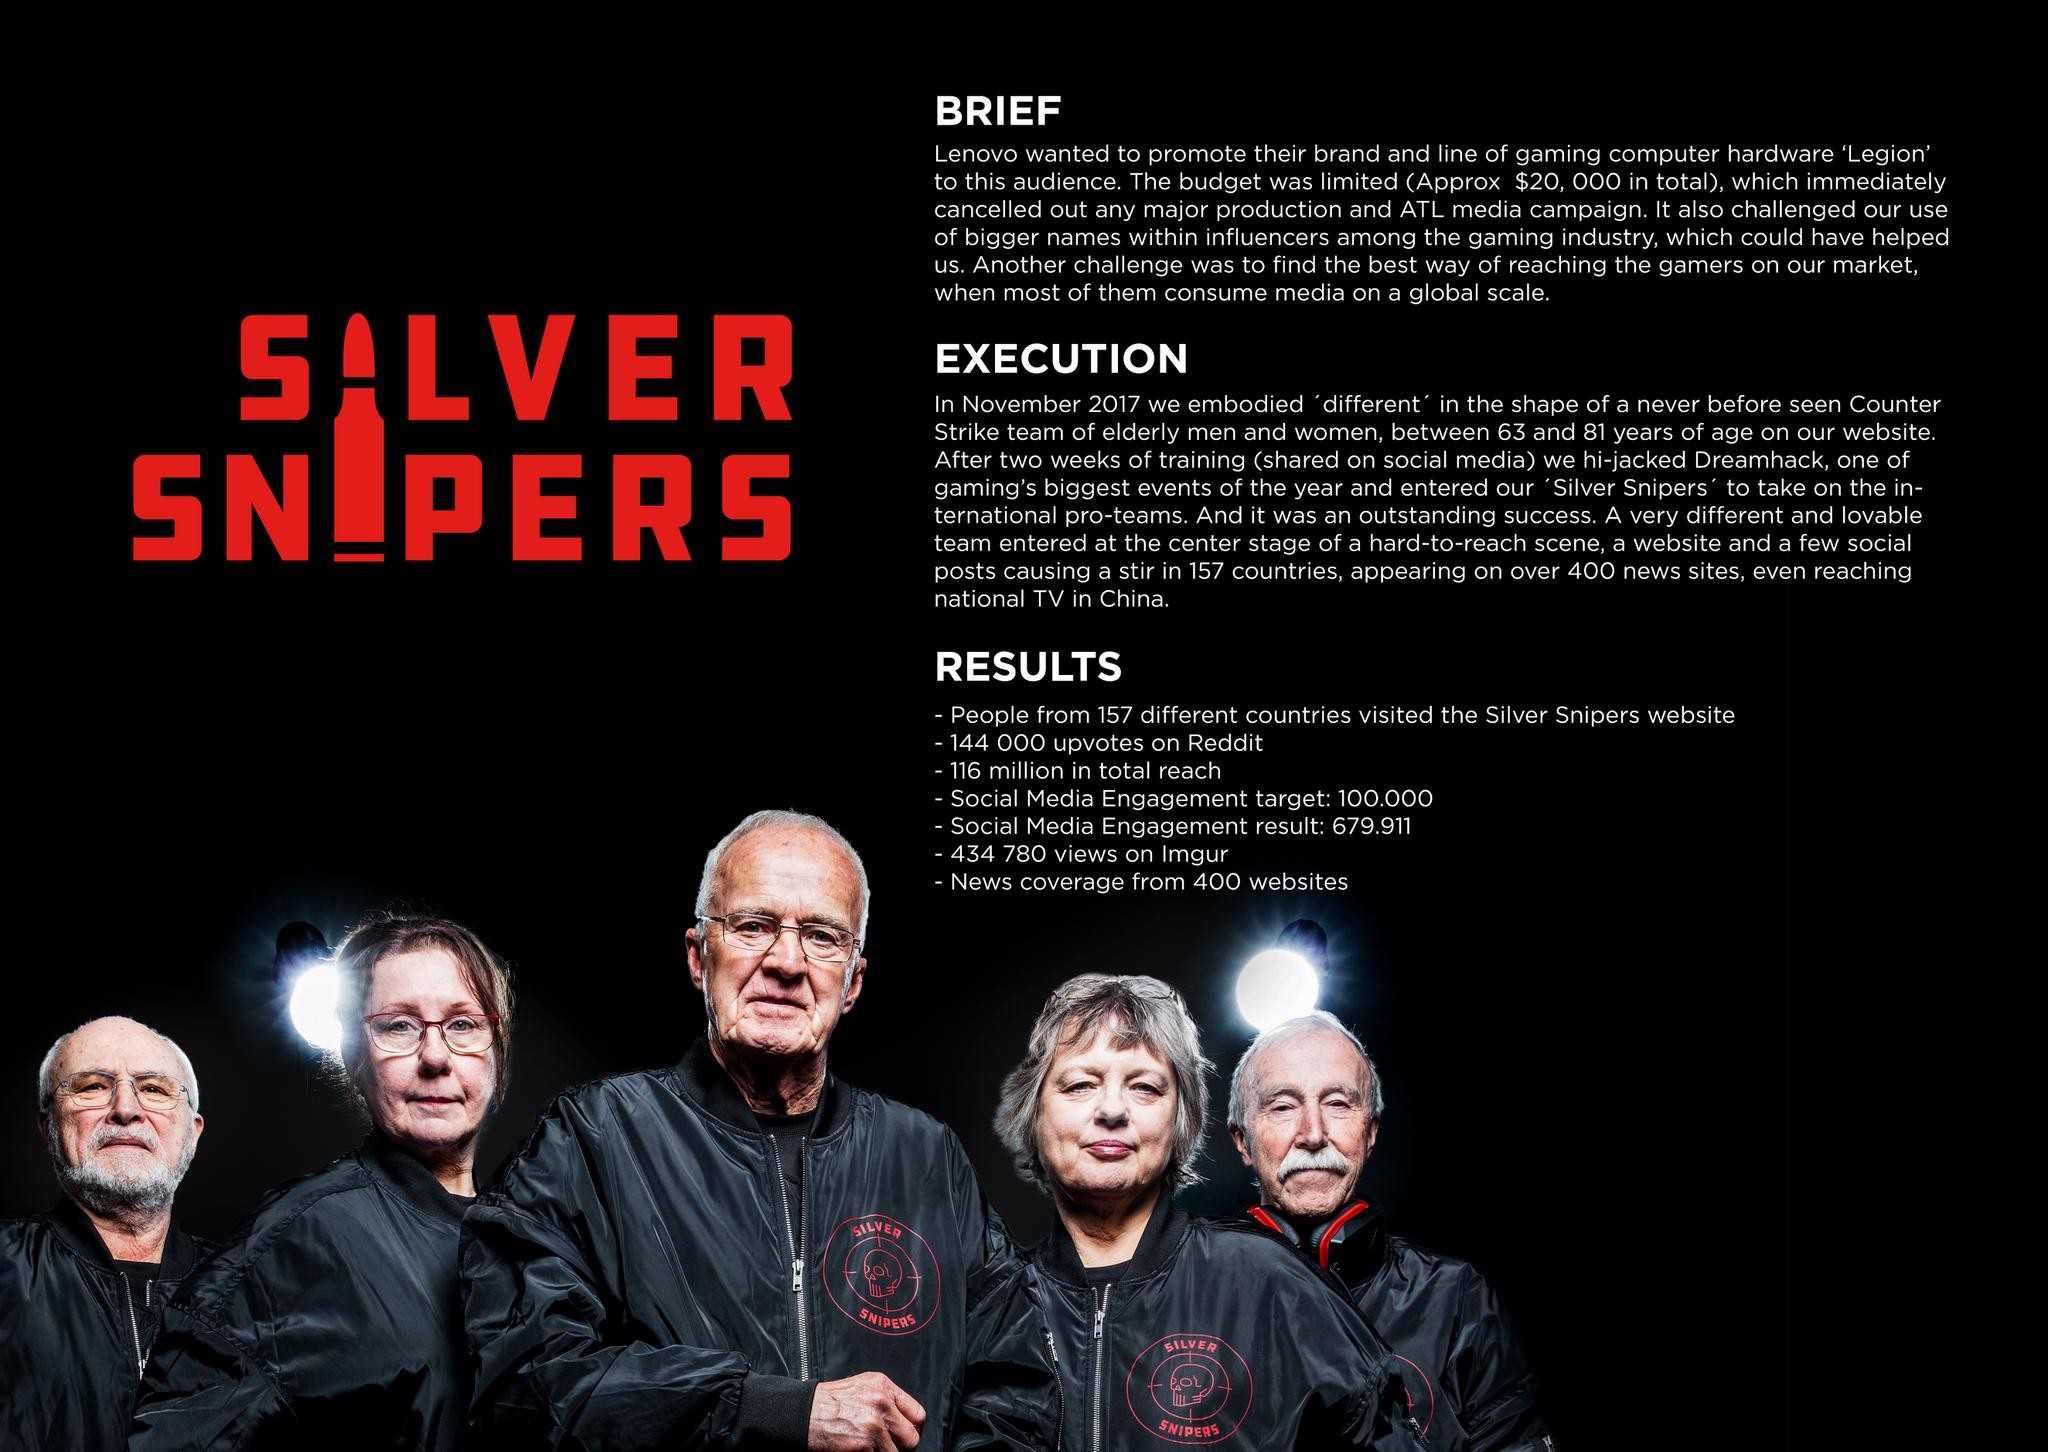 We Are The Silver Snipers